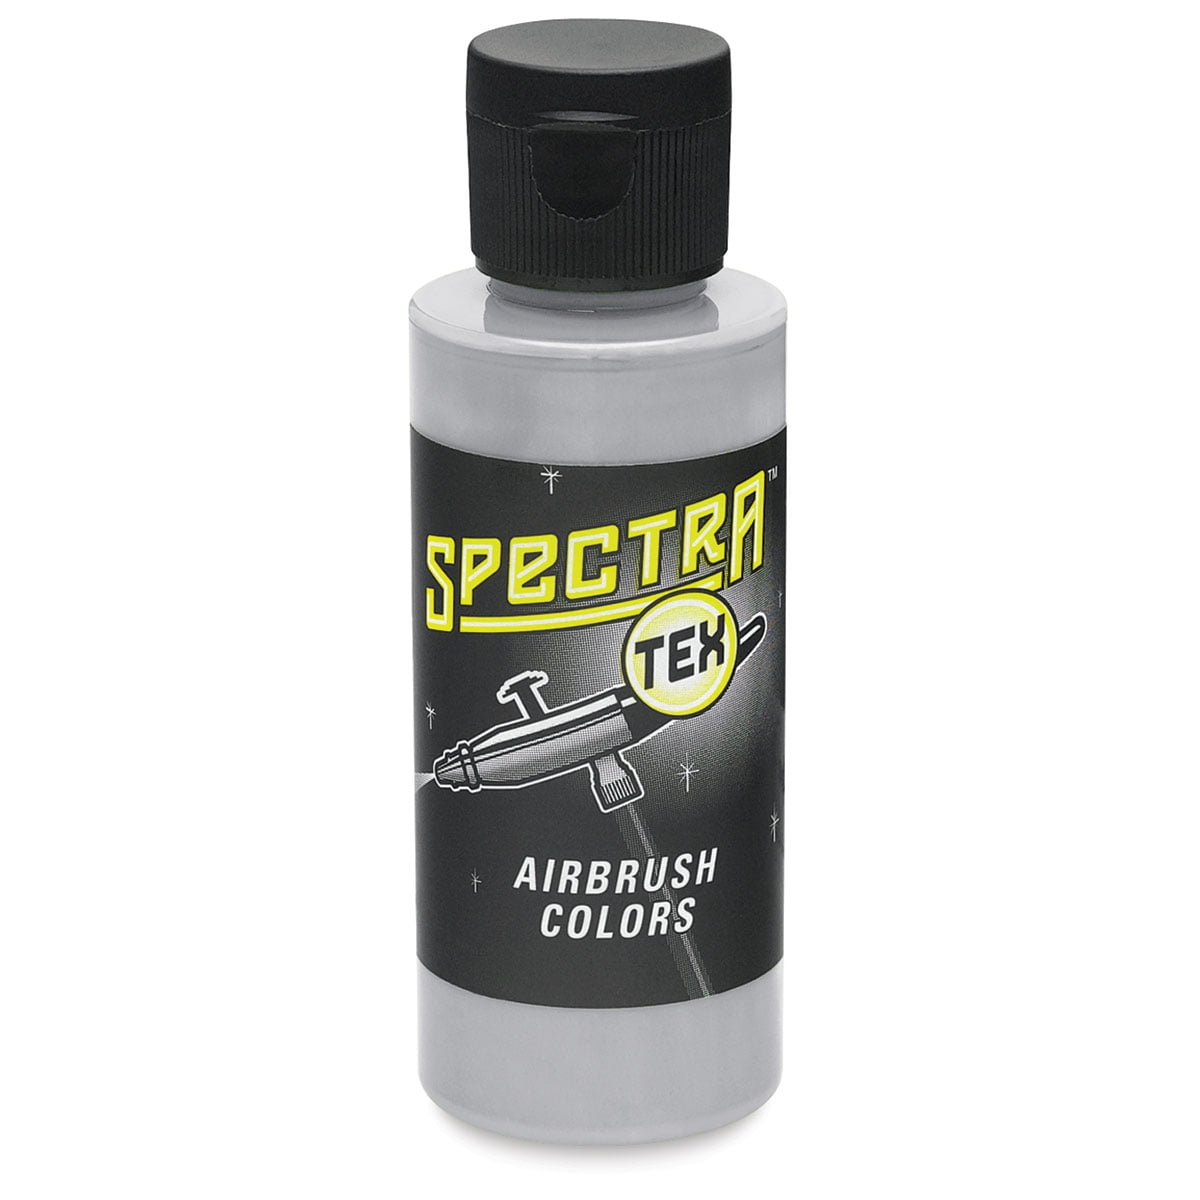 Badger Air-Opaque Airbrush Paints and Set